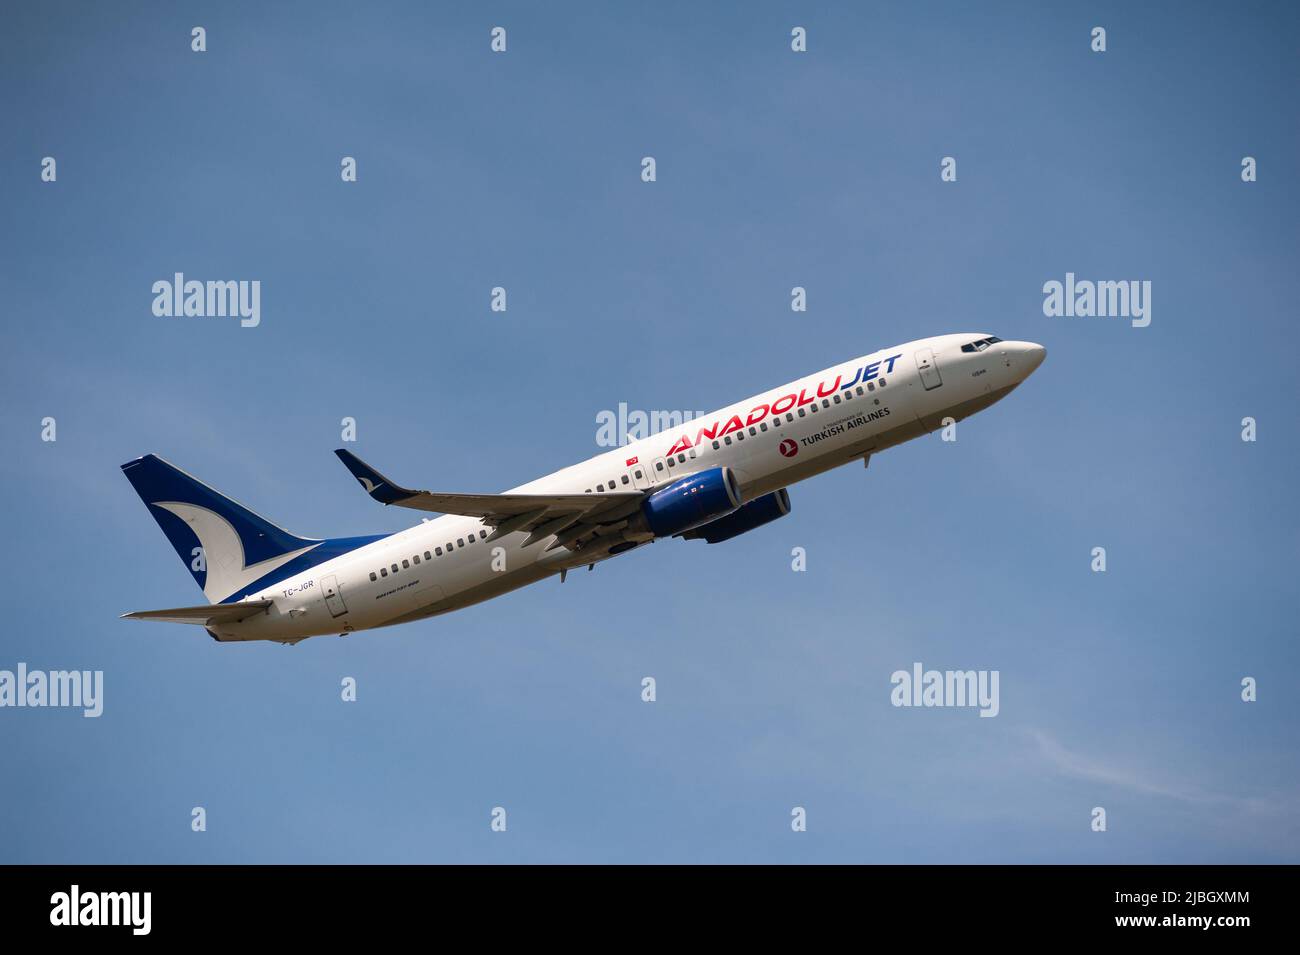 03.06.2022, Berlin, Germany, Europe - An AnadoluJet Boeing 737-800 passenger aircraft takes off from Berlin Brandenburg Airport BER. Stock Photo